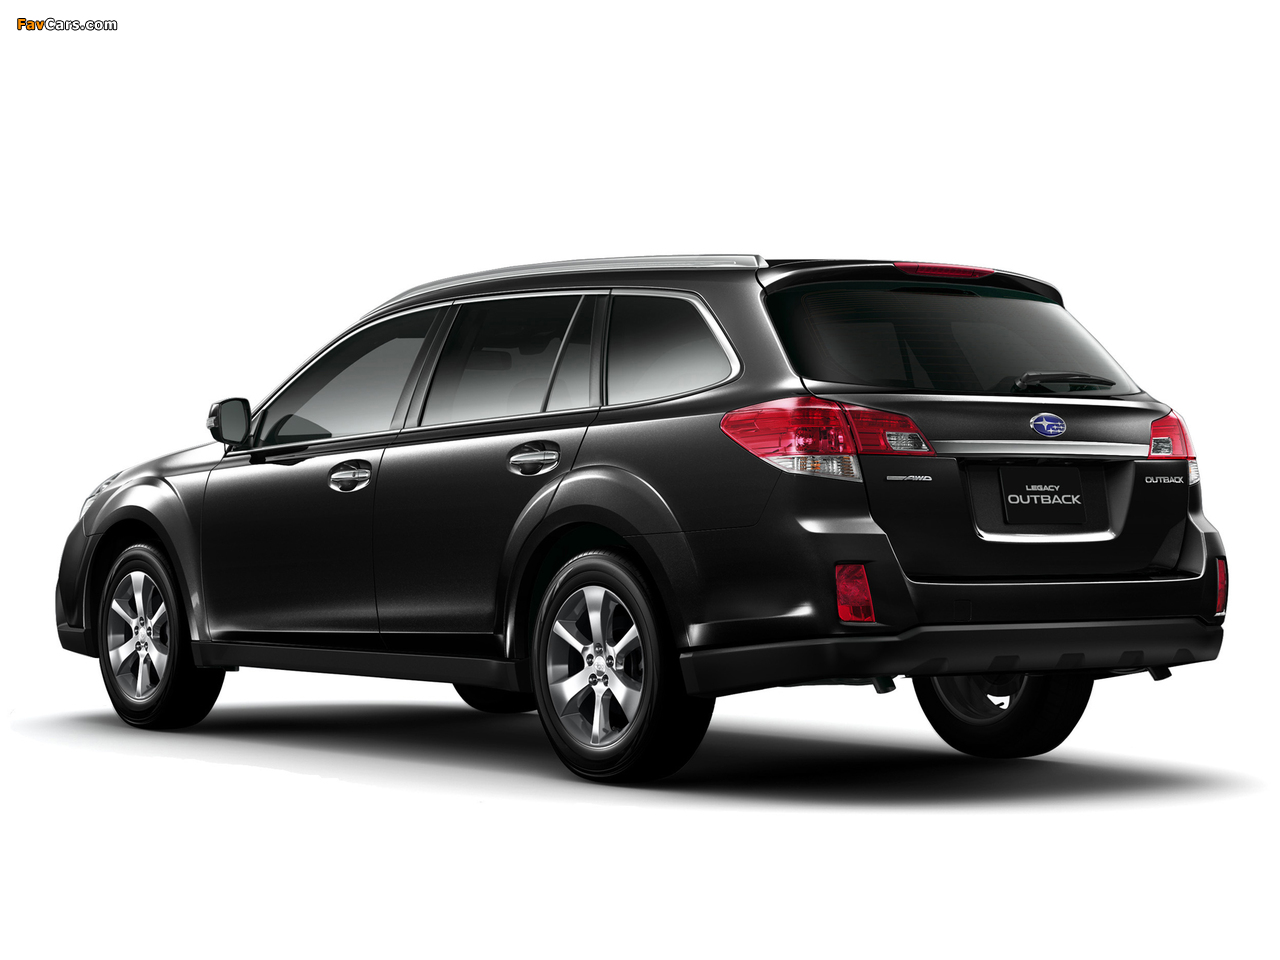 Pictures of Subaru Legacy Outback 3.6R (BR) 2012 (1280 x 960)